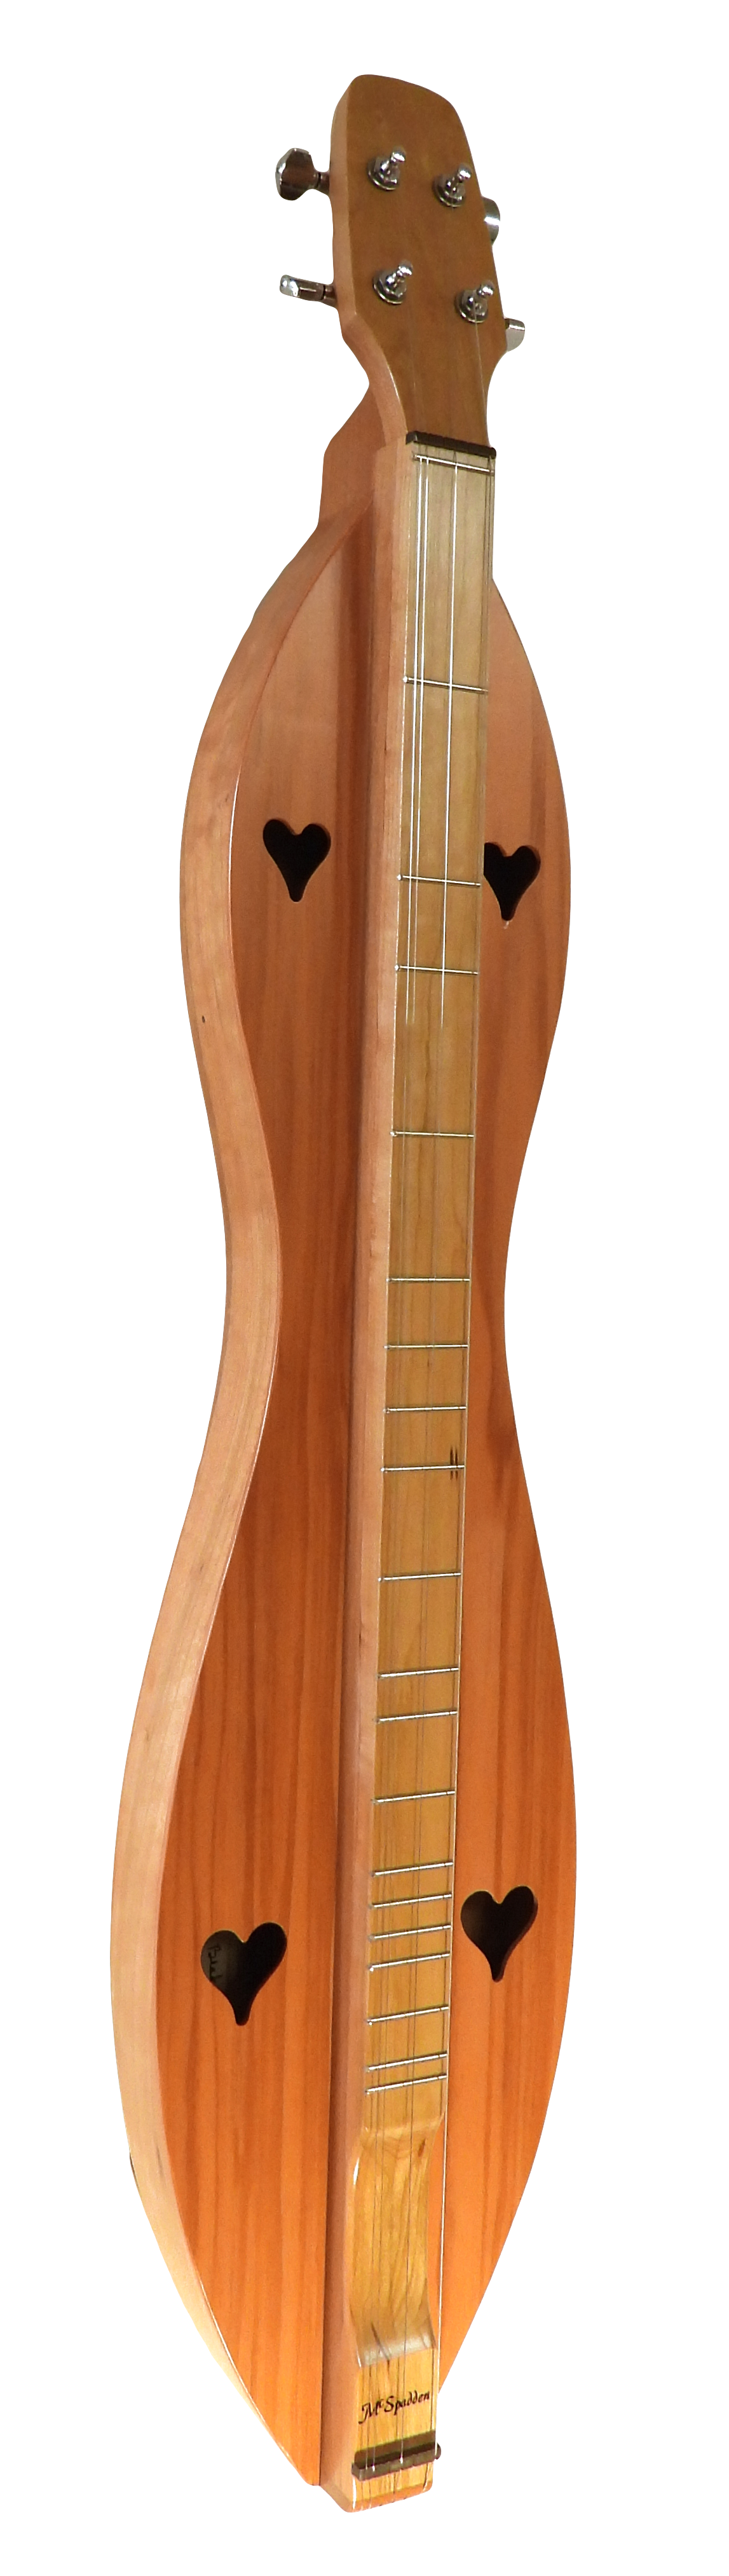 A 4 String, Flathead, Hourglass, with Cherry back and sides, Redwood top (4FHCR) guitar with two wings on it, accompanied by a Lifetime Warranty.